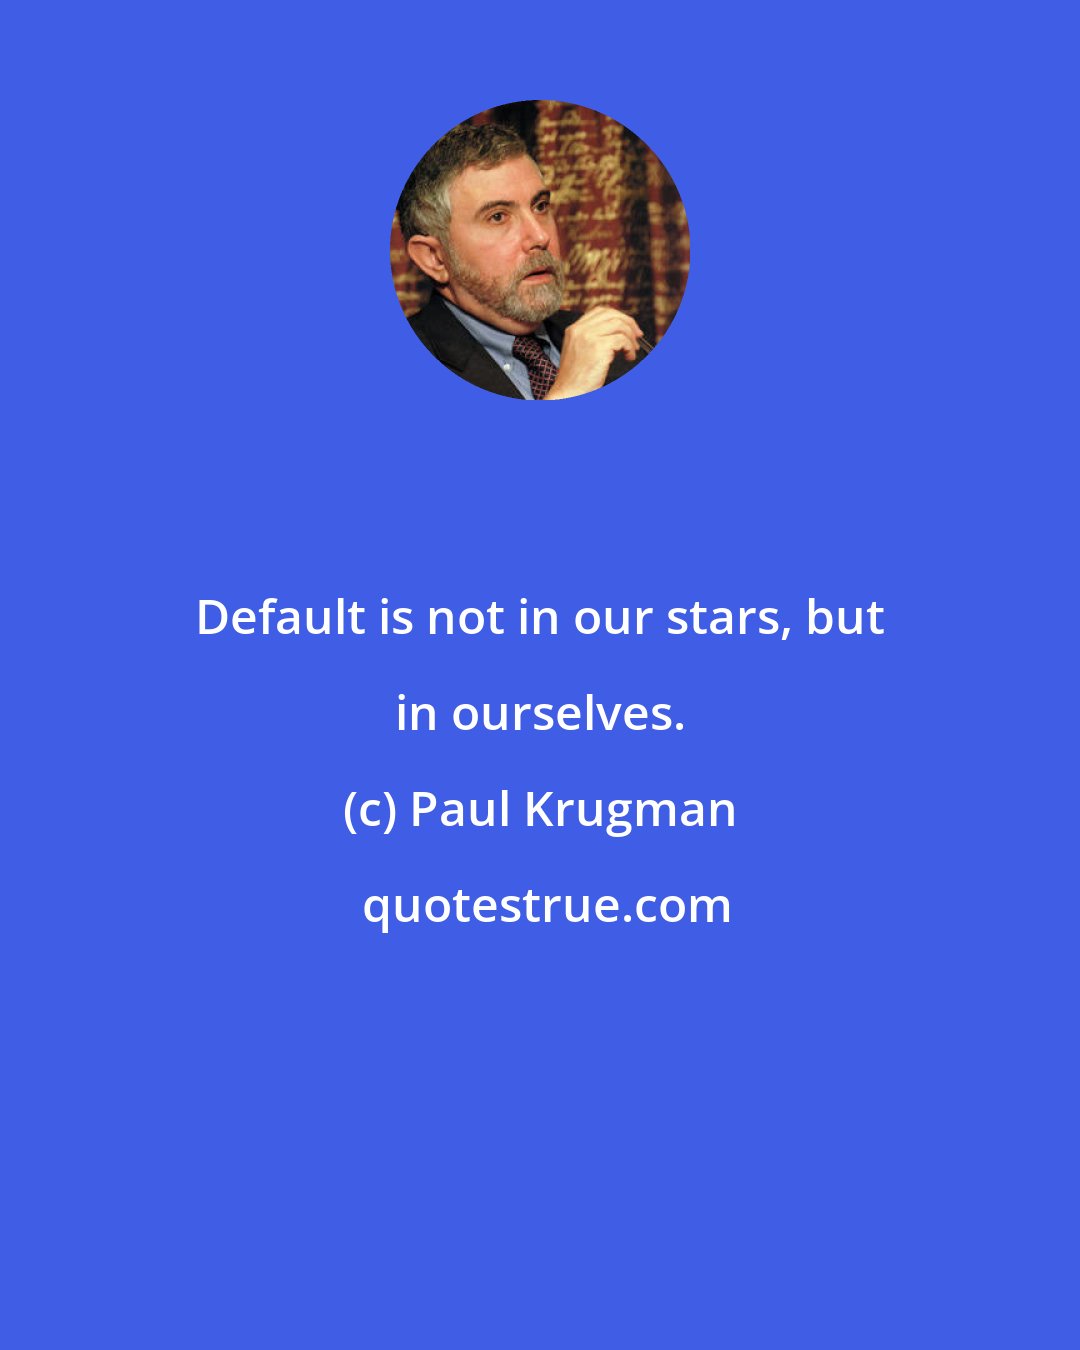 Paul Krugman: Default is not in our stars, but in ourselves.